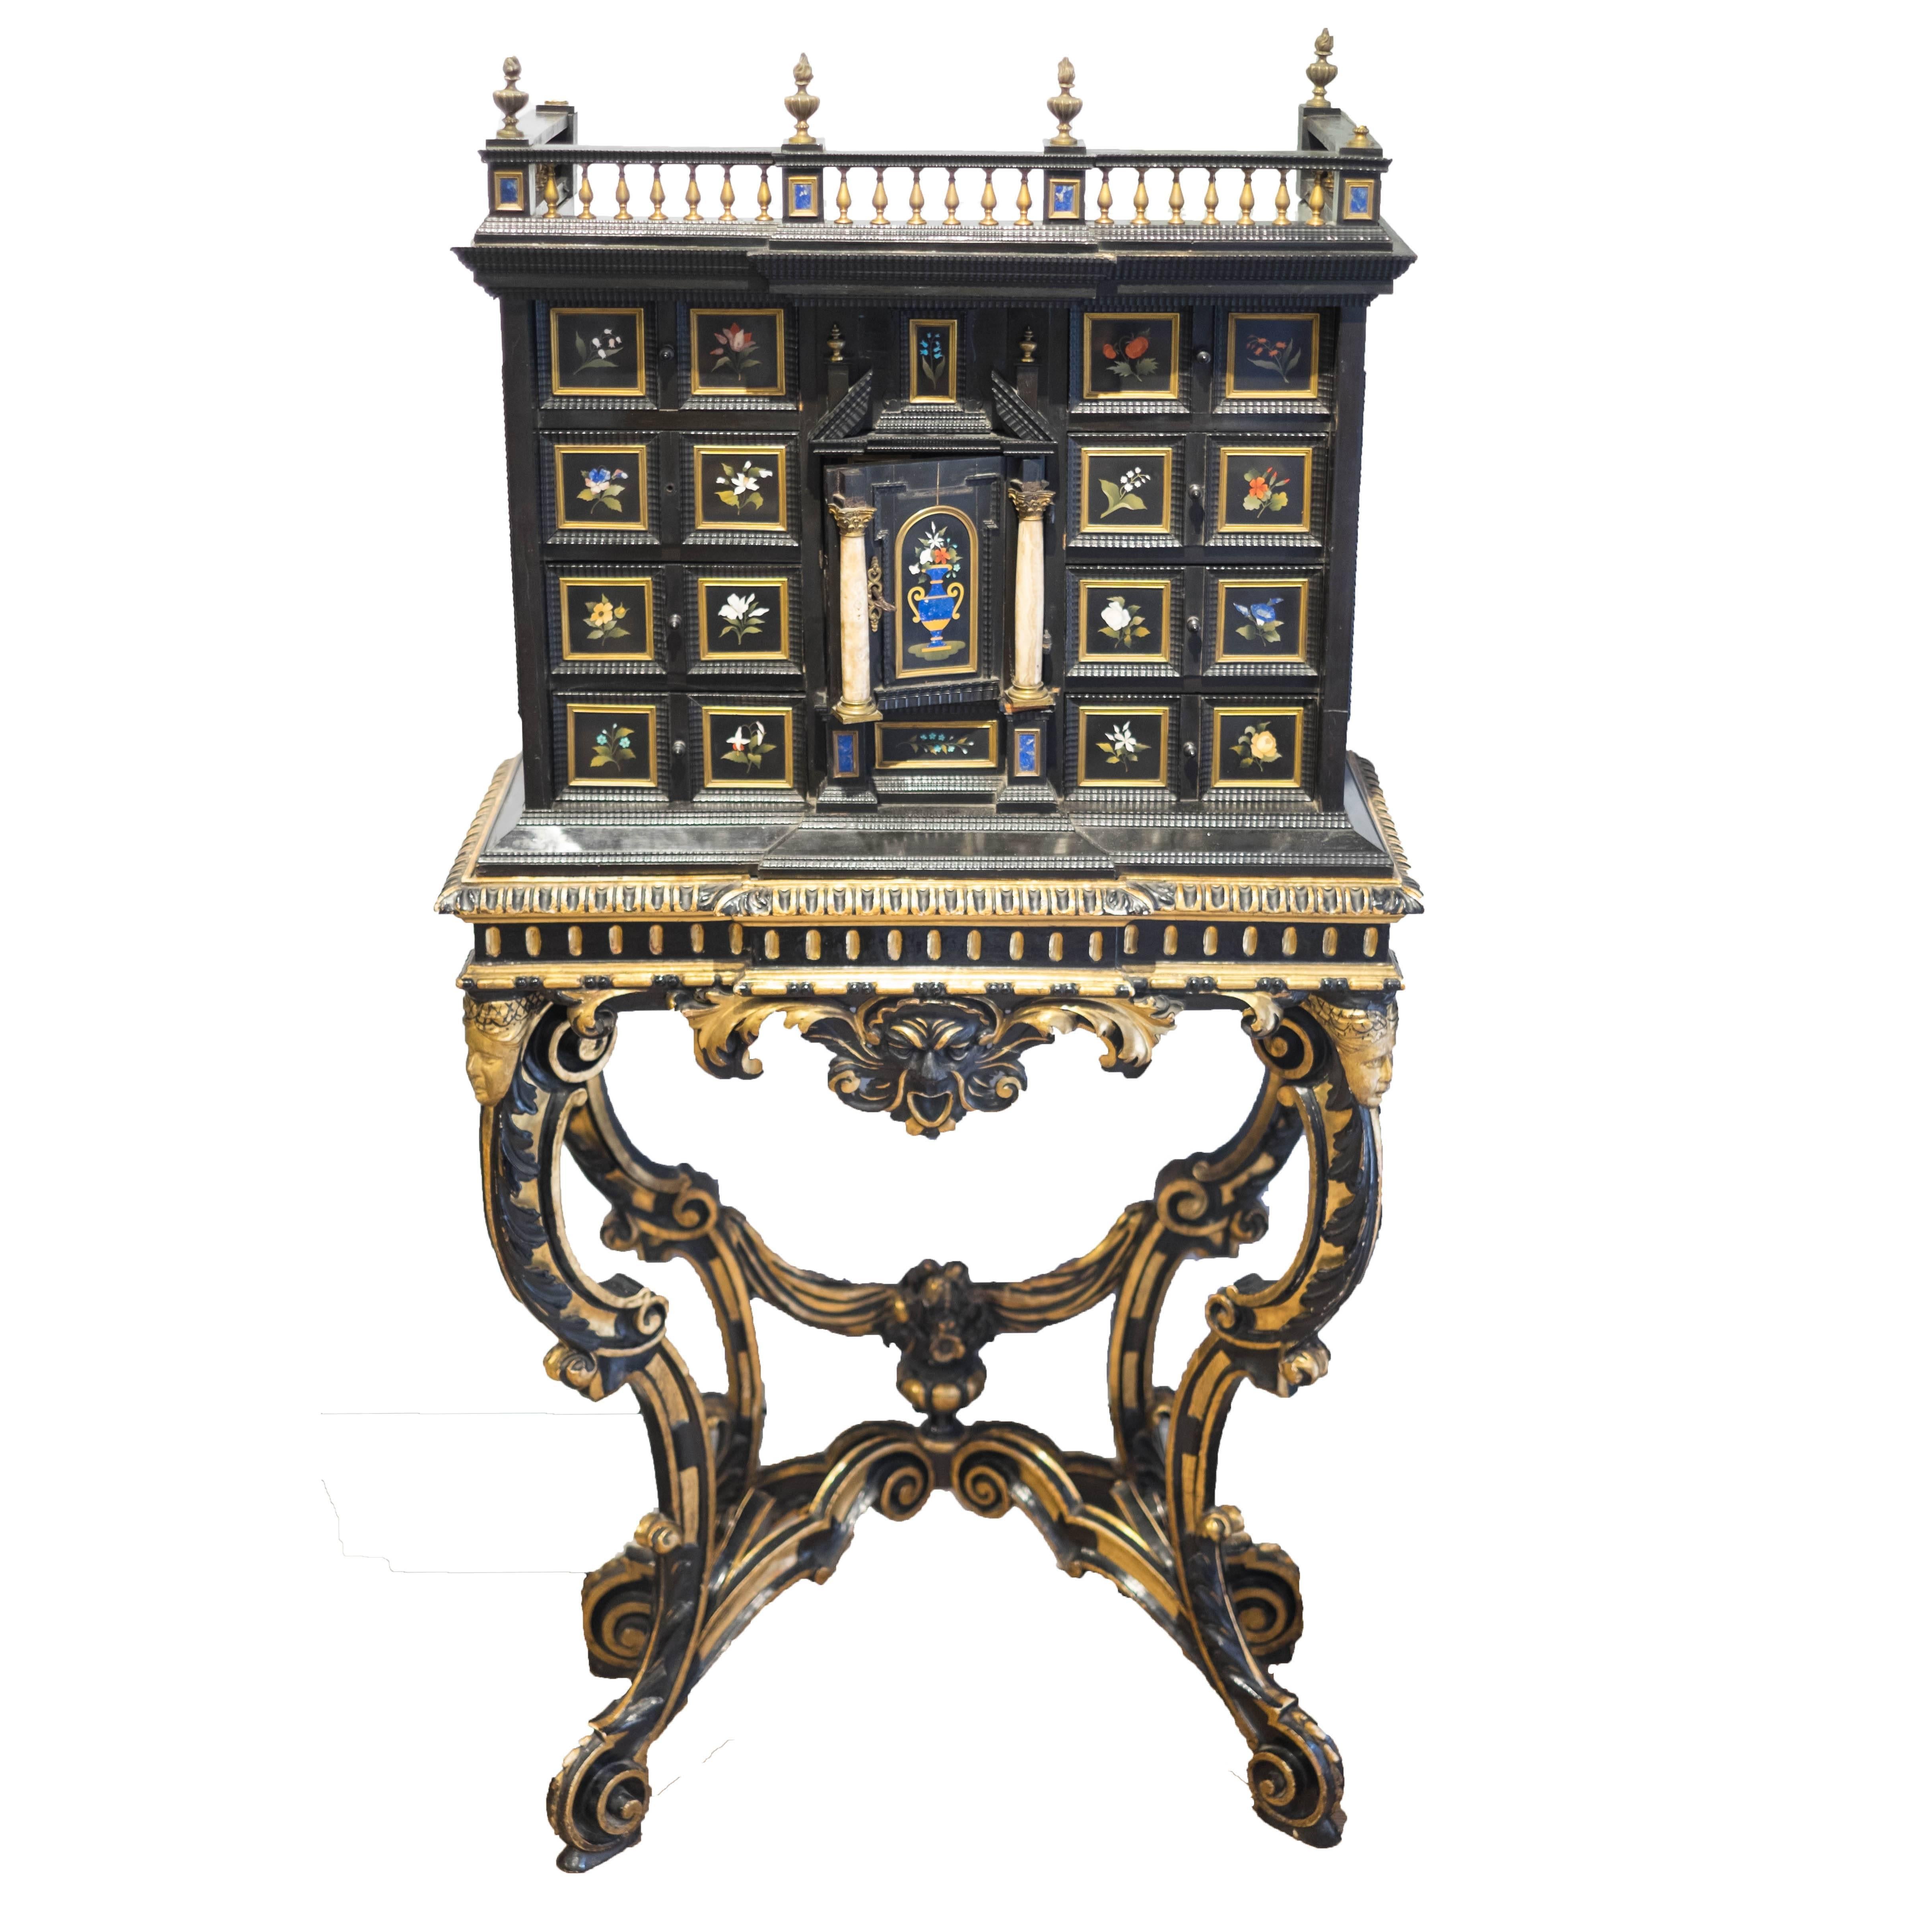 Pietra Dura florentine cabinet
Ebonised wood and giltwood base
Measures: H 62 in. (157.5cm); W 31 in. (78.7cm); D 14 in. (35.6cm)

Cabinet made of softwood with ebony veneer and rippled moulding. The door in the centre of the facade is decorated